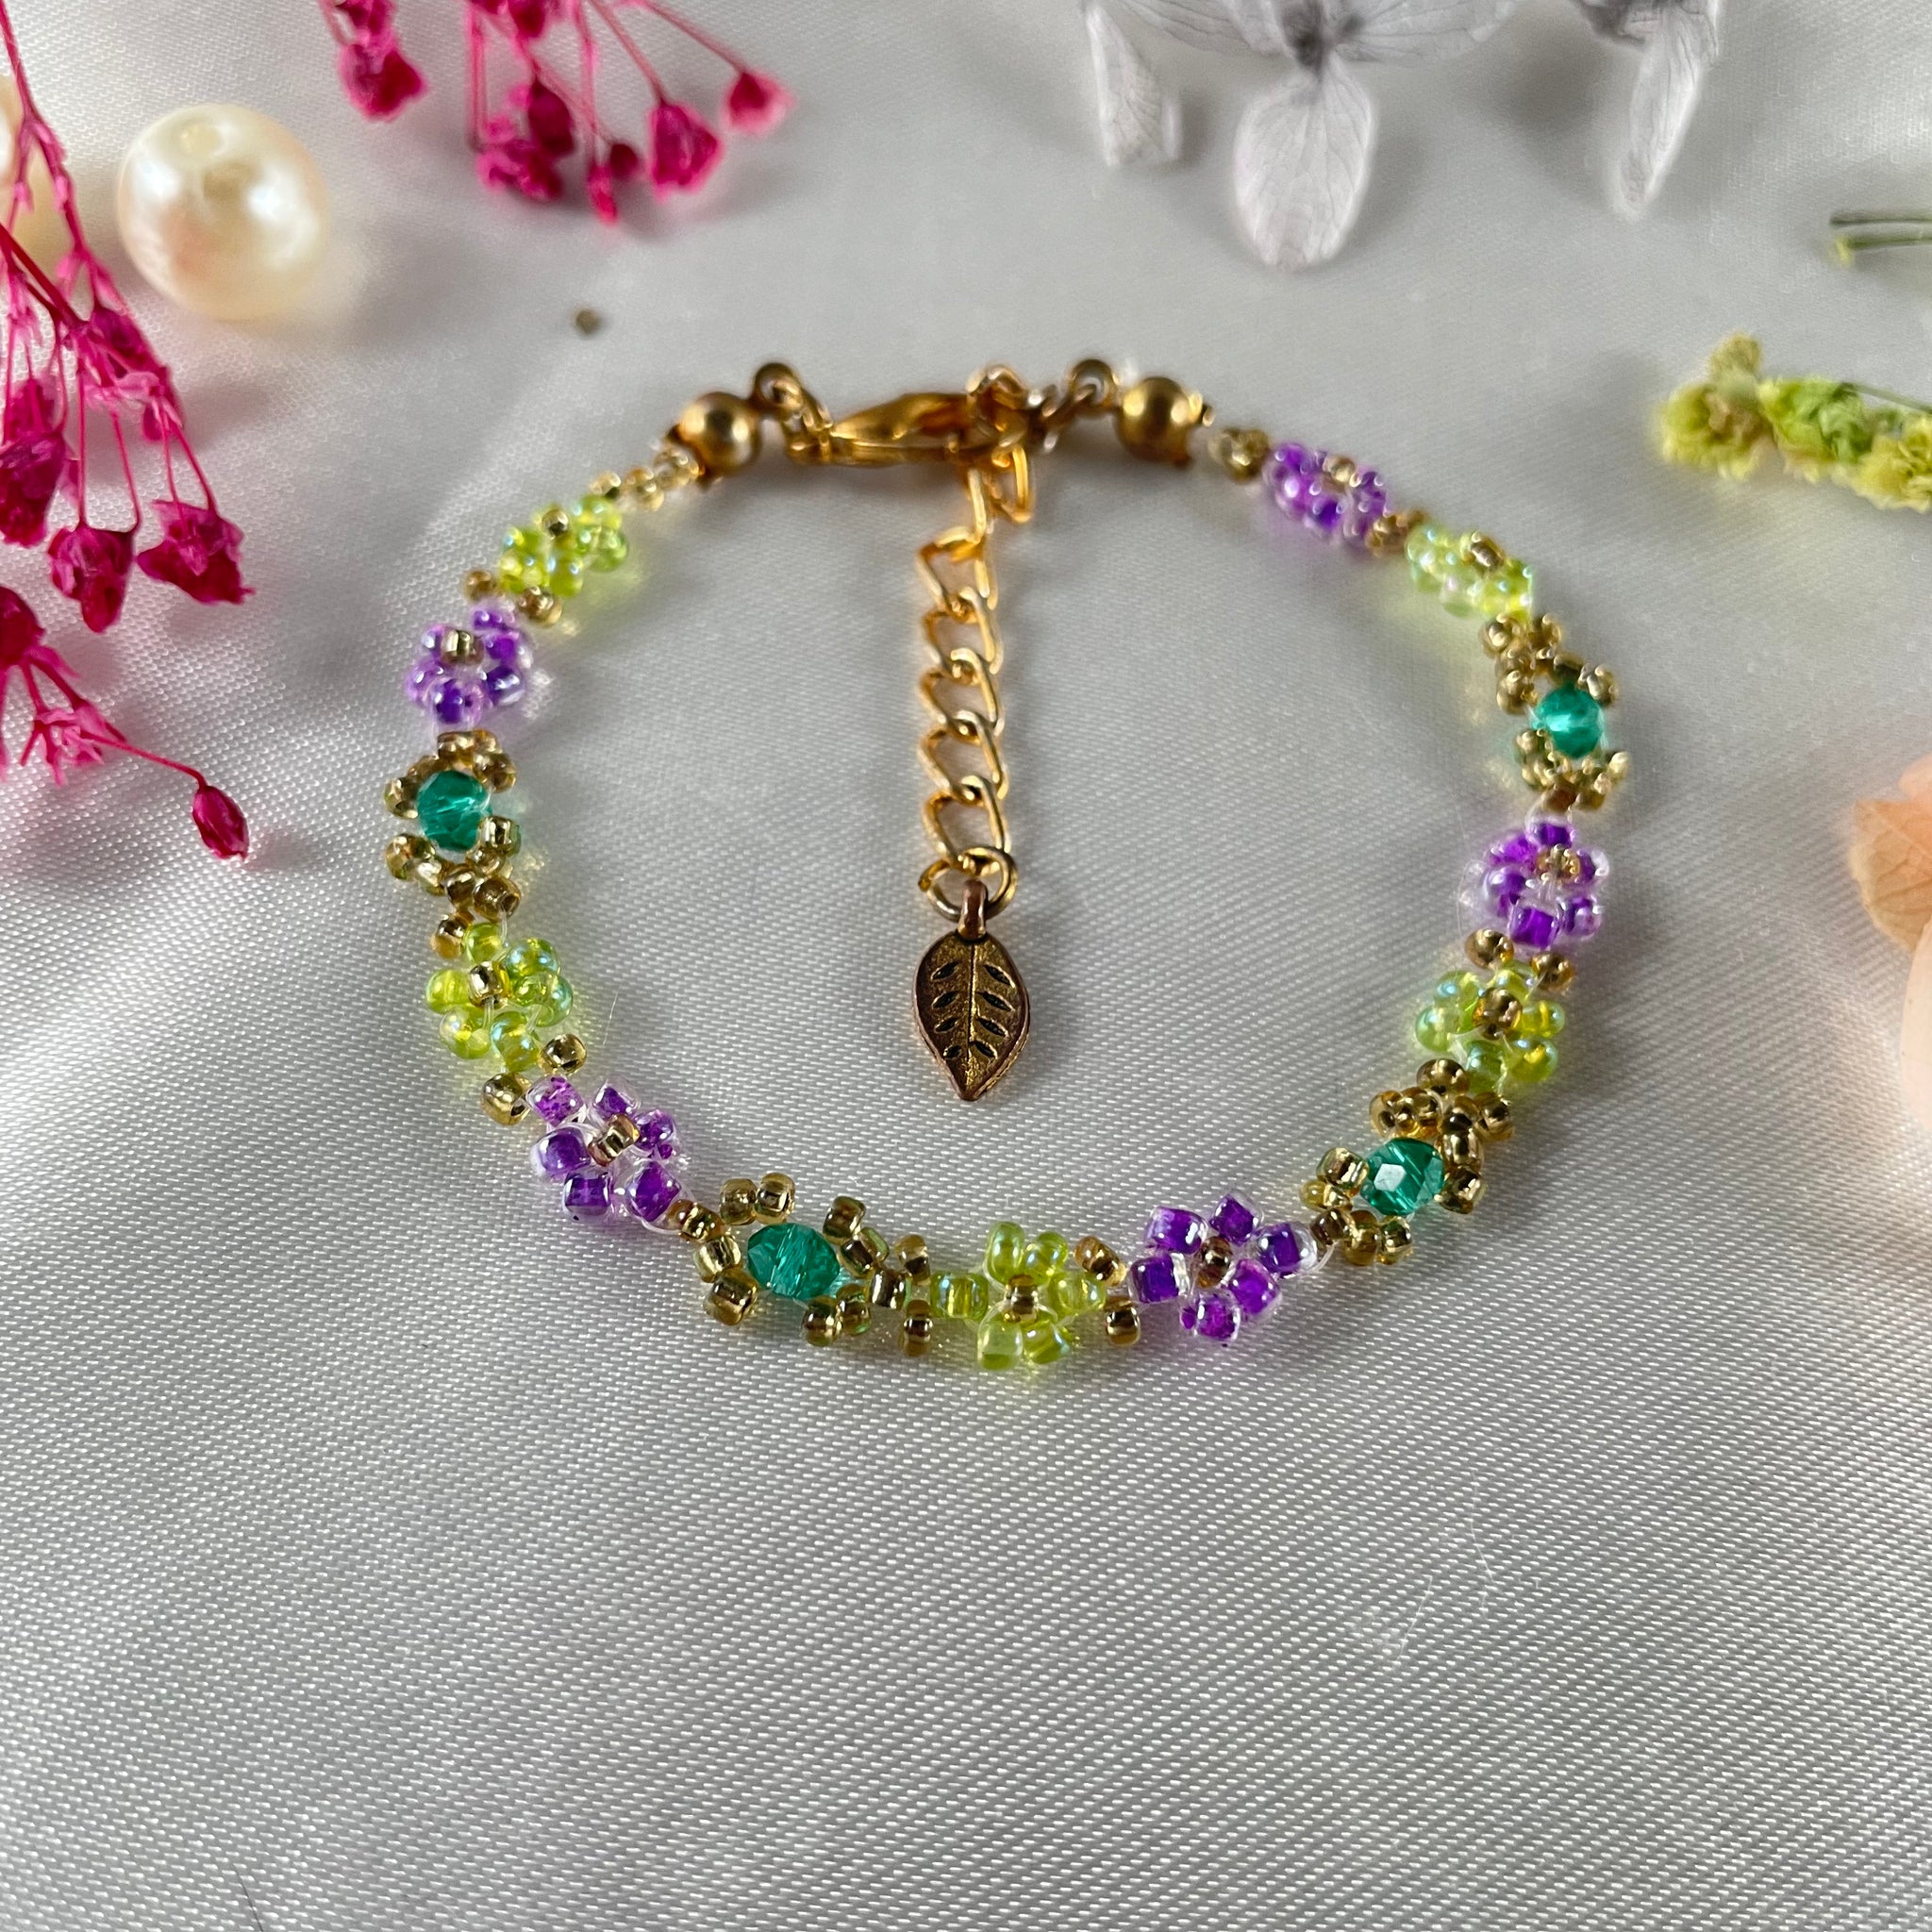 Daisy Flower with Crystal style Bracelet Green and purple combination